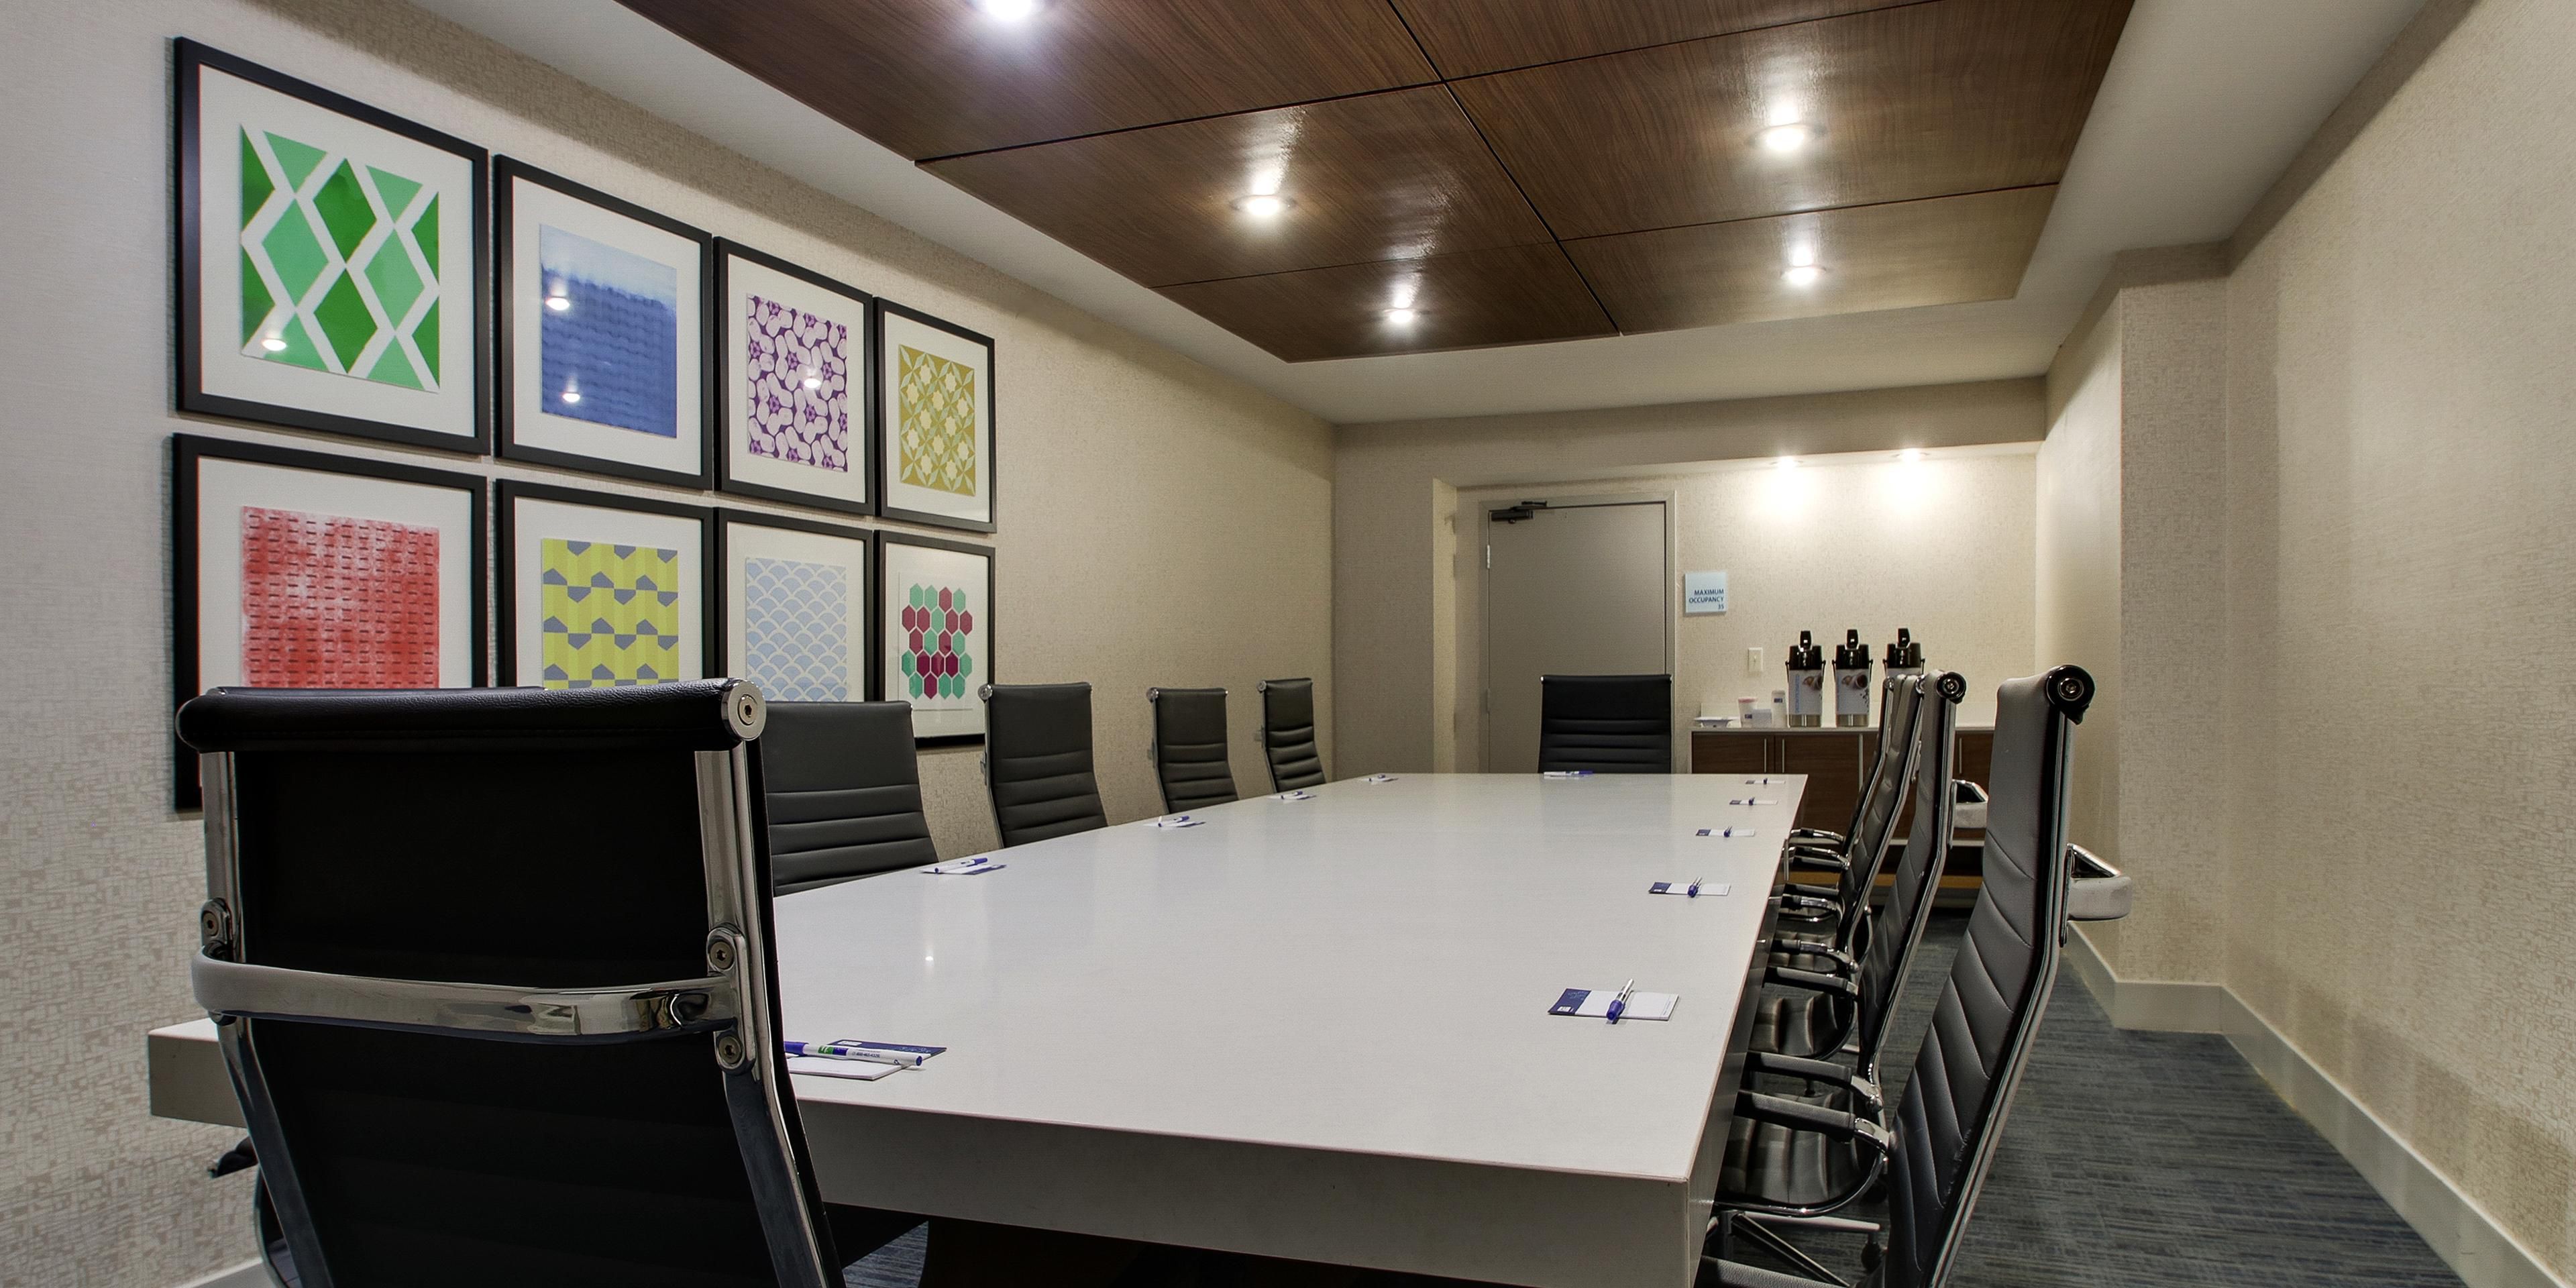 Small meetings play a vital role in the success of many organizations. Are you planning a small corporate meeting, board retreat or brainstorming session? Our 12 person boardroom is sure to lead to big ideas!   Our team is dedicated to making your meeting a huge success!